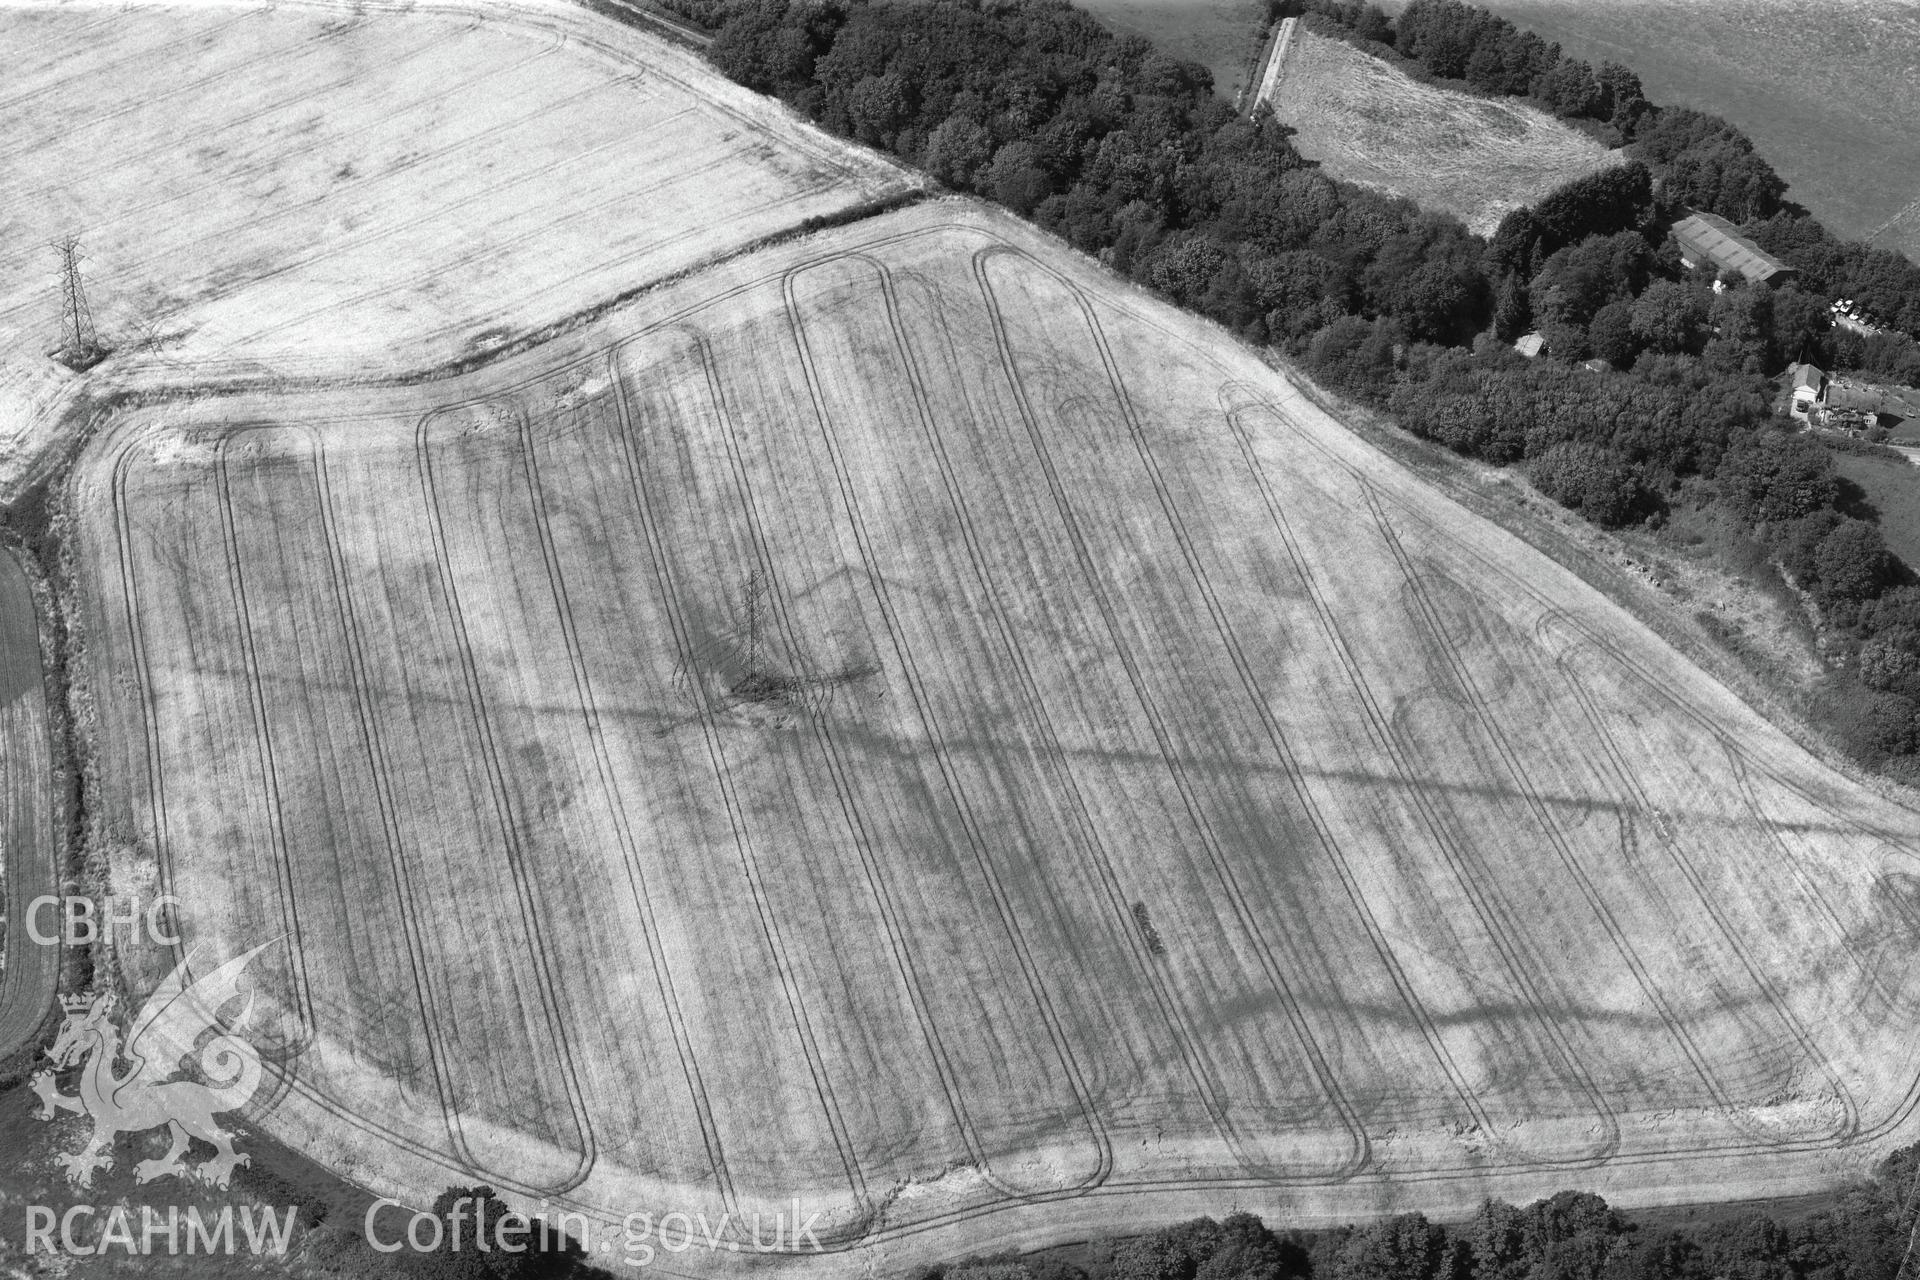 Malthouse Road defended enclosure and Graig-yr-Eurych castle mound (covered by woodland), between Caerleon and Cwmbran. Oblique aerial photograph taken during the Royal Commission?s programme of archaeological aerial reconnaissance by Toby Driver on 1st August 2013.